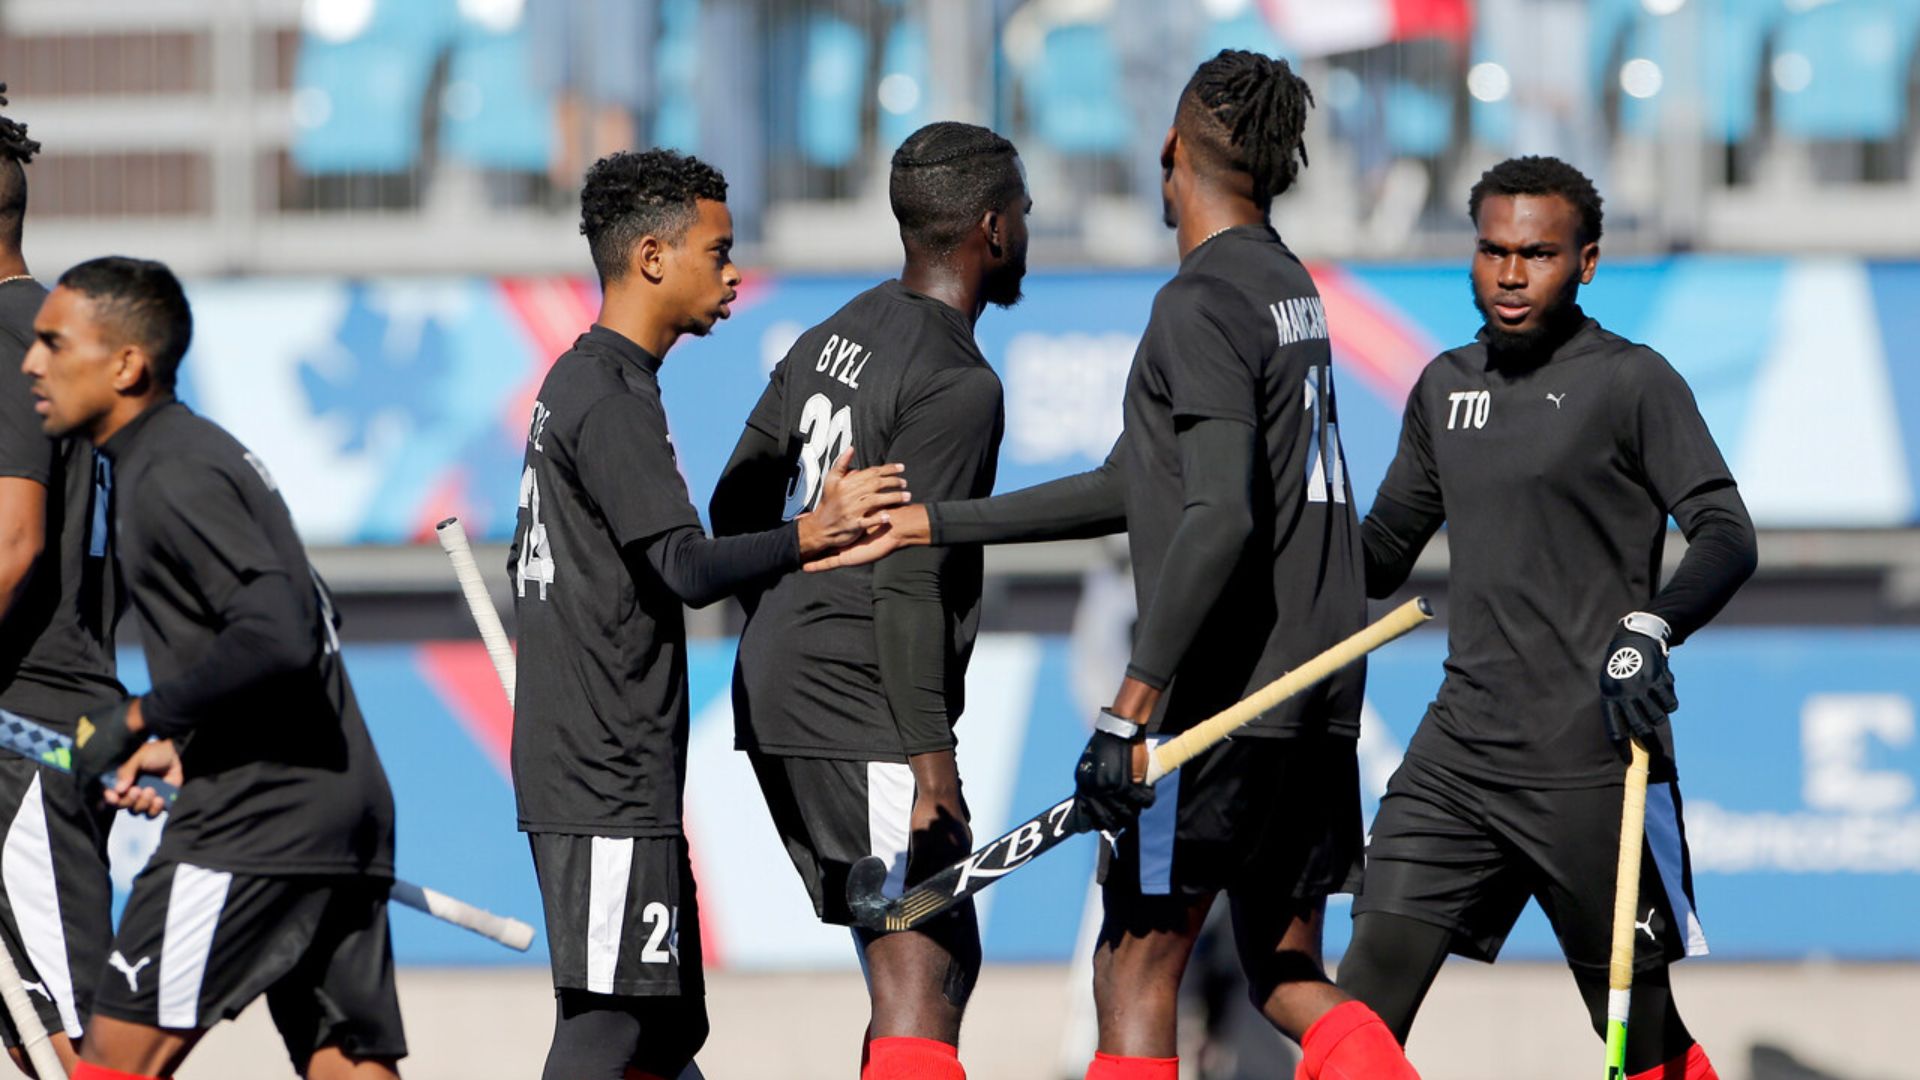 Field Hockey: Trinidad and Tobago crushes Peru and claims seventh place